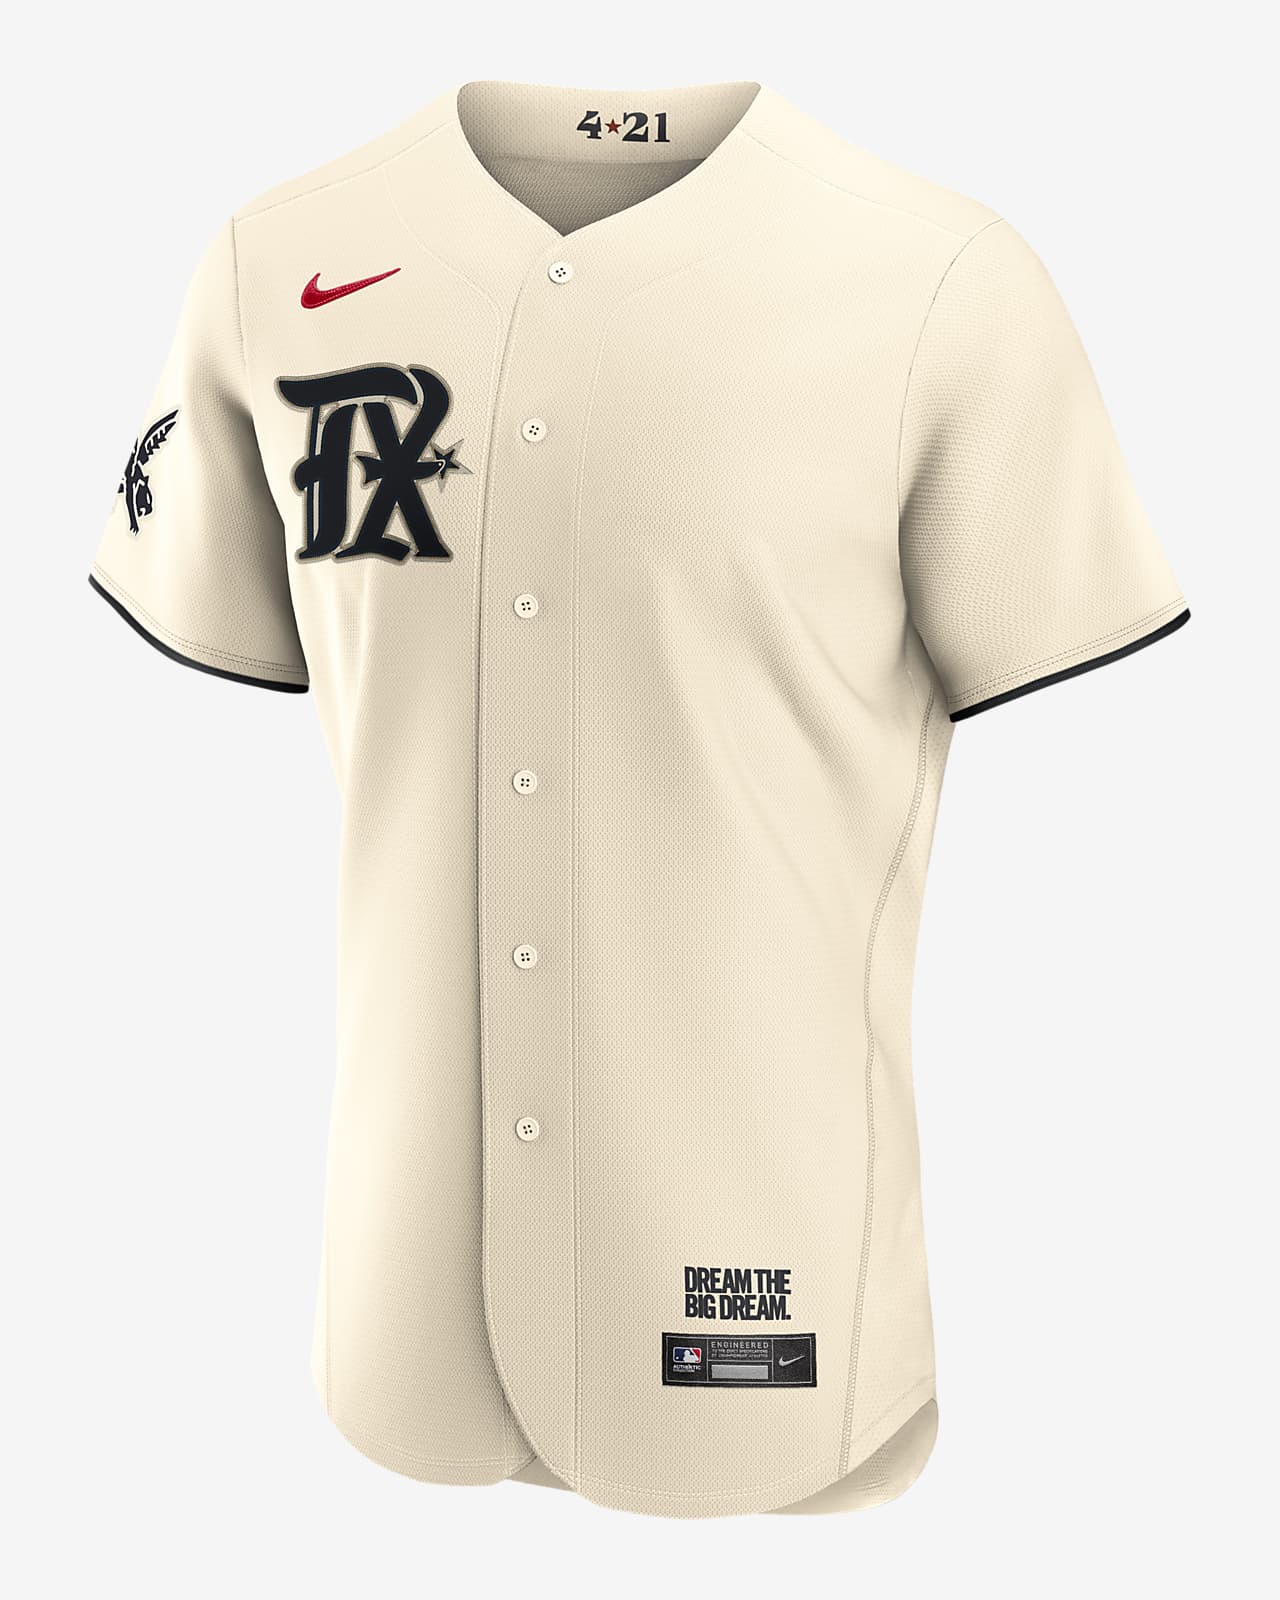 Uitstroom wacht geloof MLB Texas Rangers City Connect Men's Authentic Baseball Jersey. Nike.com